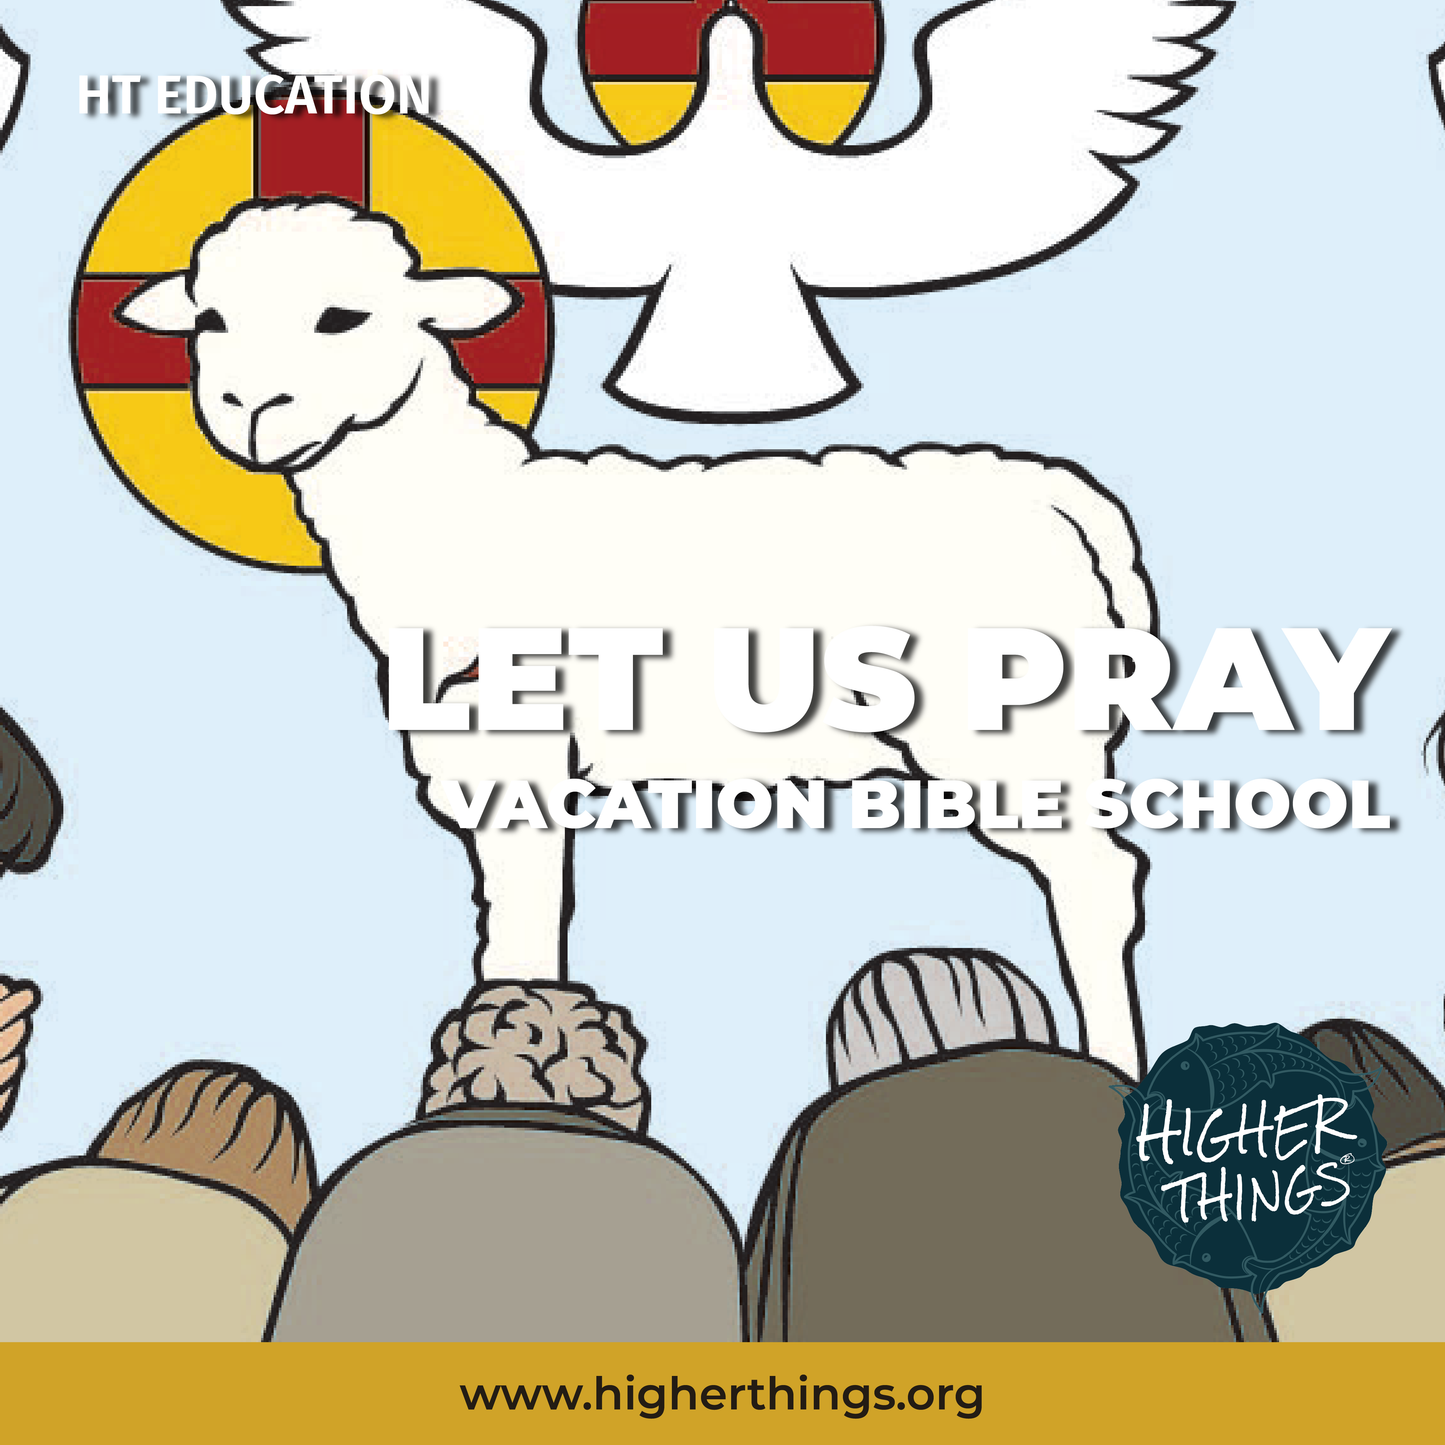 Higher Things® Let Us Pray Vacation Bible School